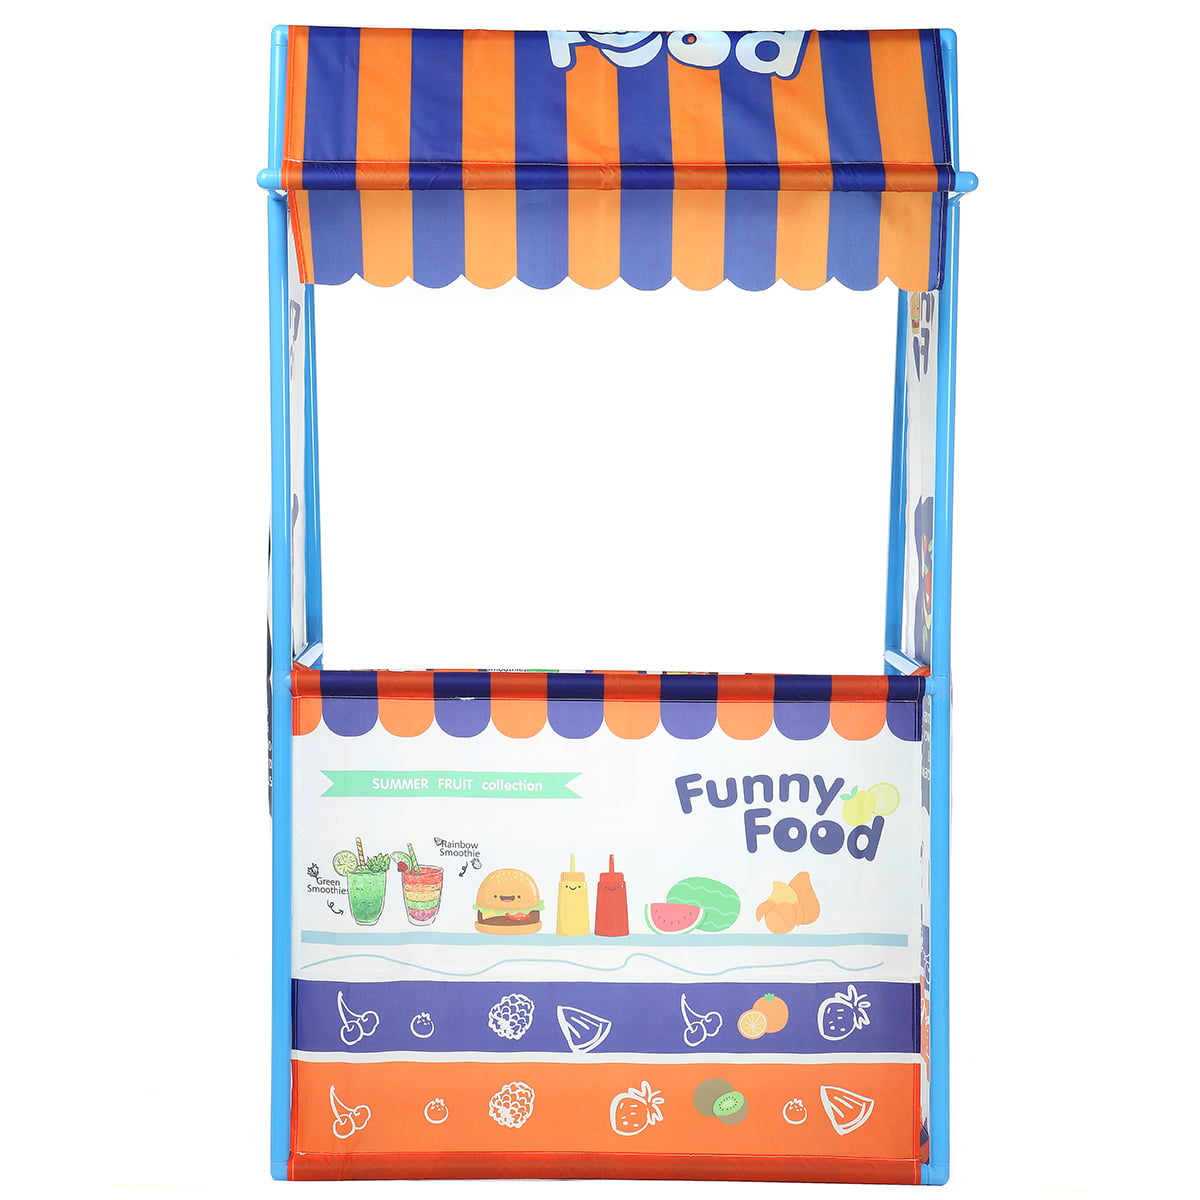 Play House Kid Toy Ice Cream Cart Play Set Pretend Baby Food Toy Play R6N1 H7F5